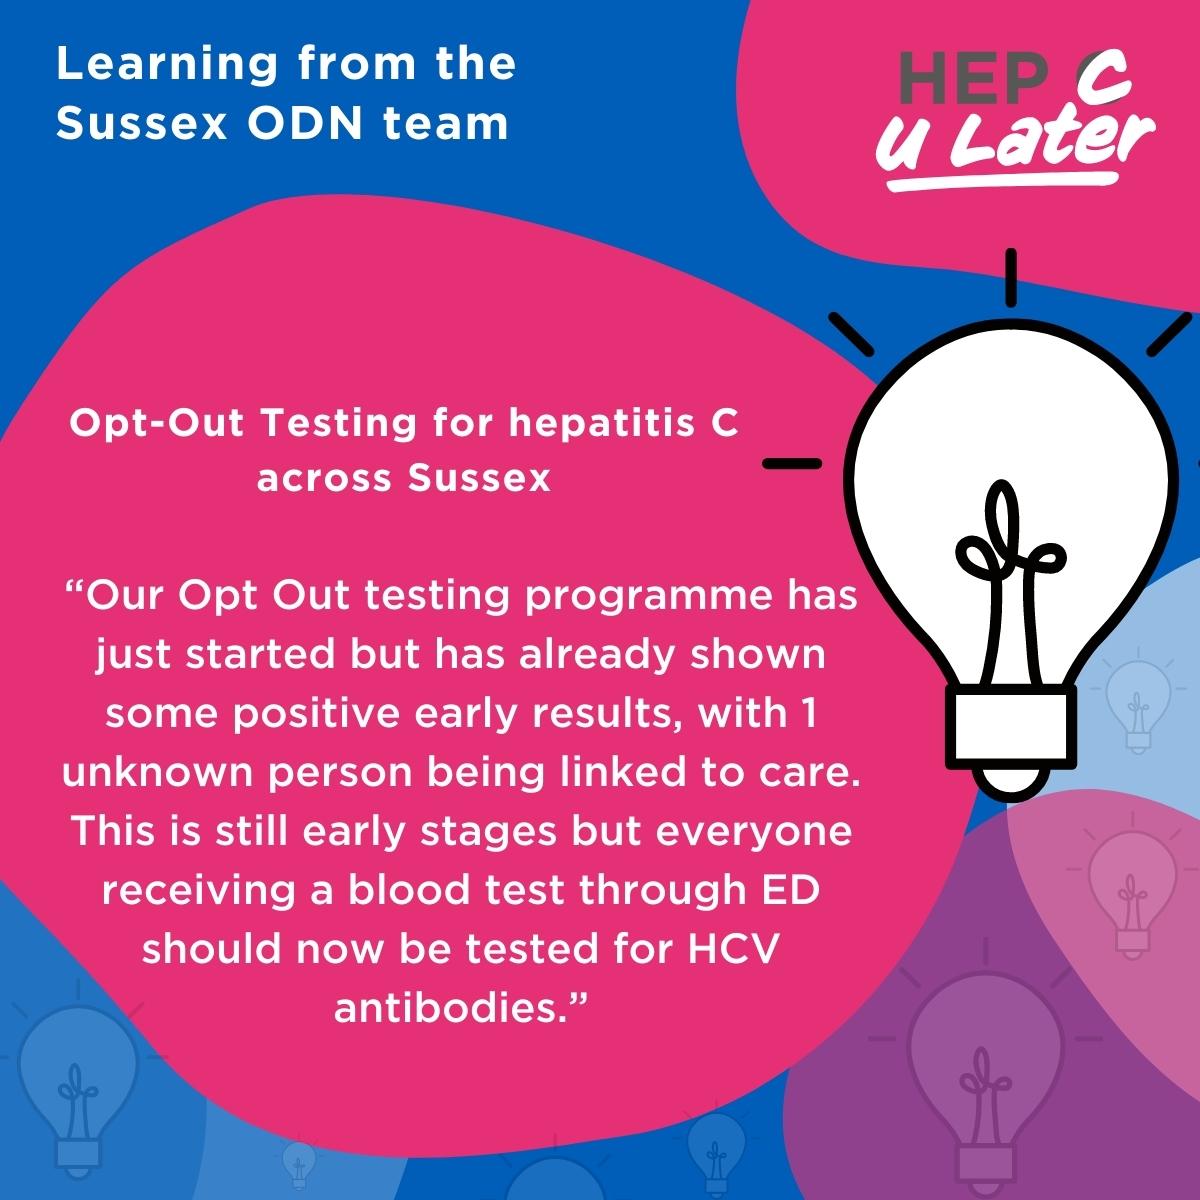 Hear from Duncan Cresswell, Network Manager from Sussex ODN, on how his team are working collaboratively to ensure the elimination programme finds, treats and cures people with hepatitis C across Sussex here - orlo.uk/dtliY